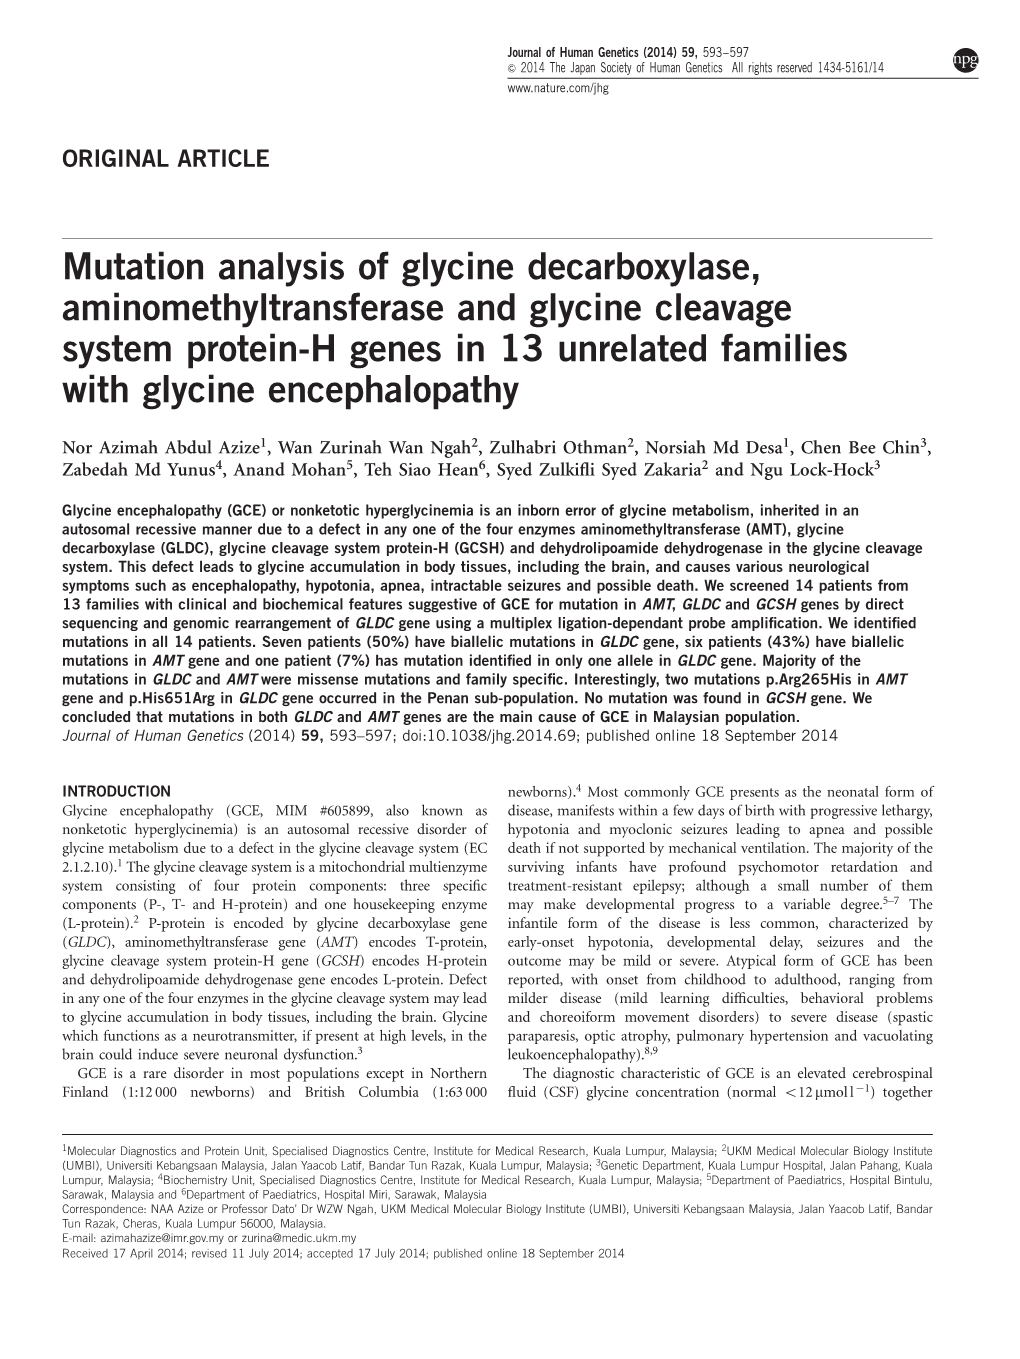 Mutation Analysis of Glycine Decarboxylase, Aminomethyltransferase and Glycine Cleavage System Protein-H Genes in 13 Unrelated Families with Glycine Encephalopathy